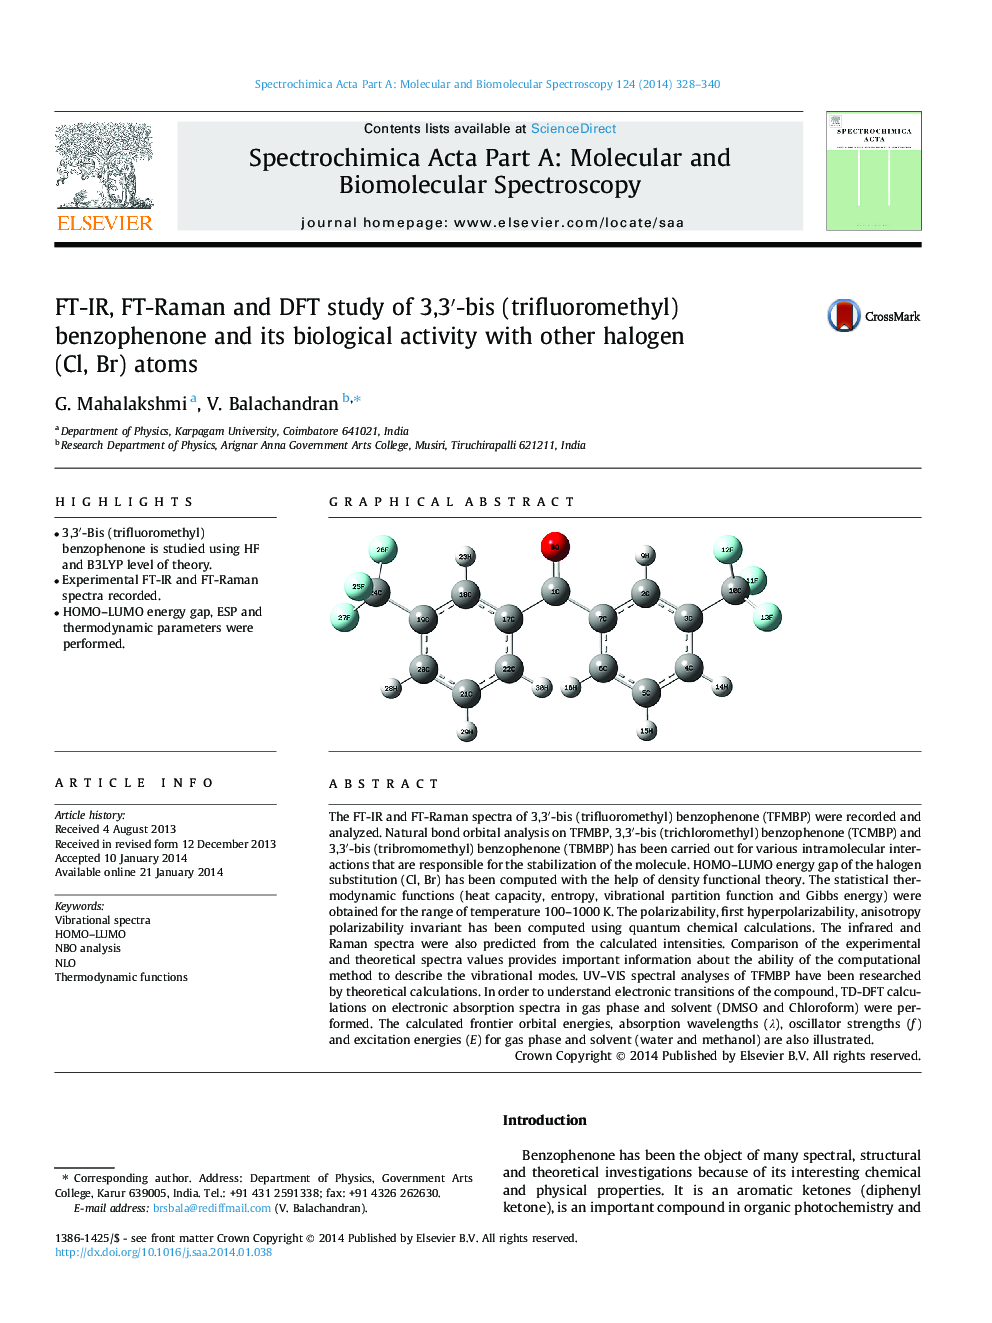 FT-IR, FT-Raman and DFT study of 3,3′-bis (trifluoromethyl) benzophenone and its biological activity with other halogen (Cl, Br) atoms